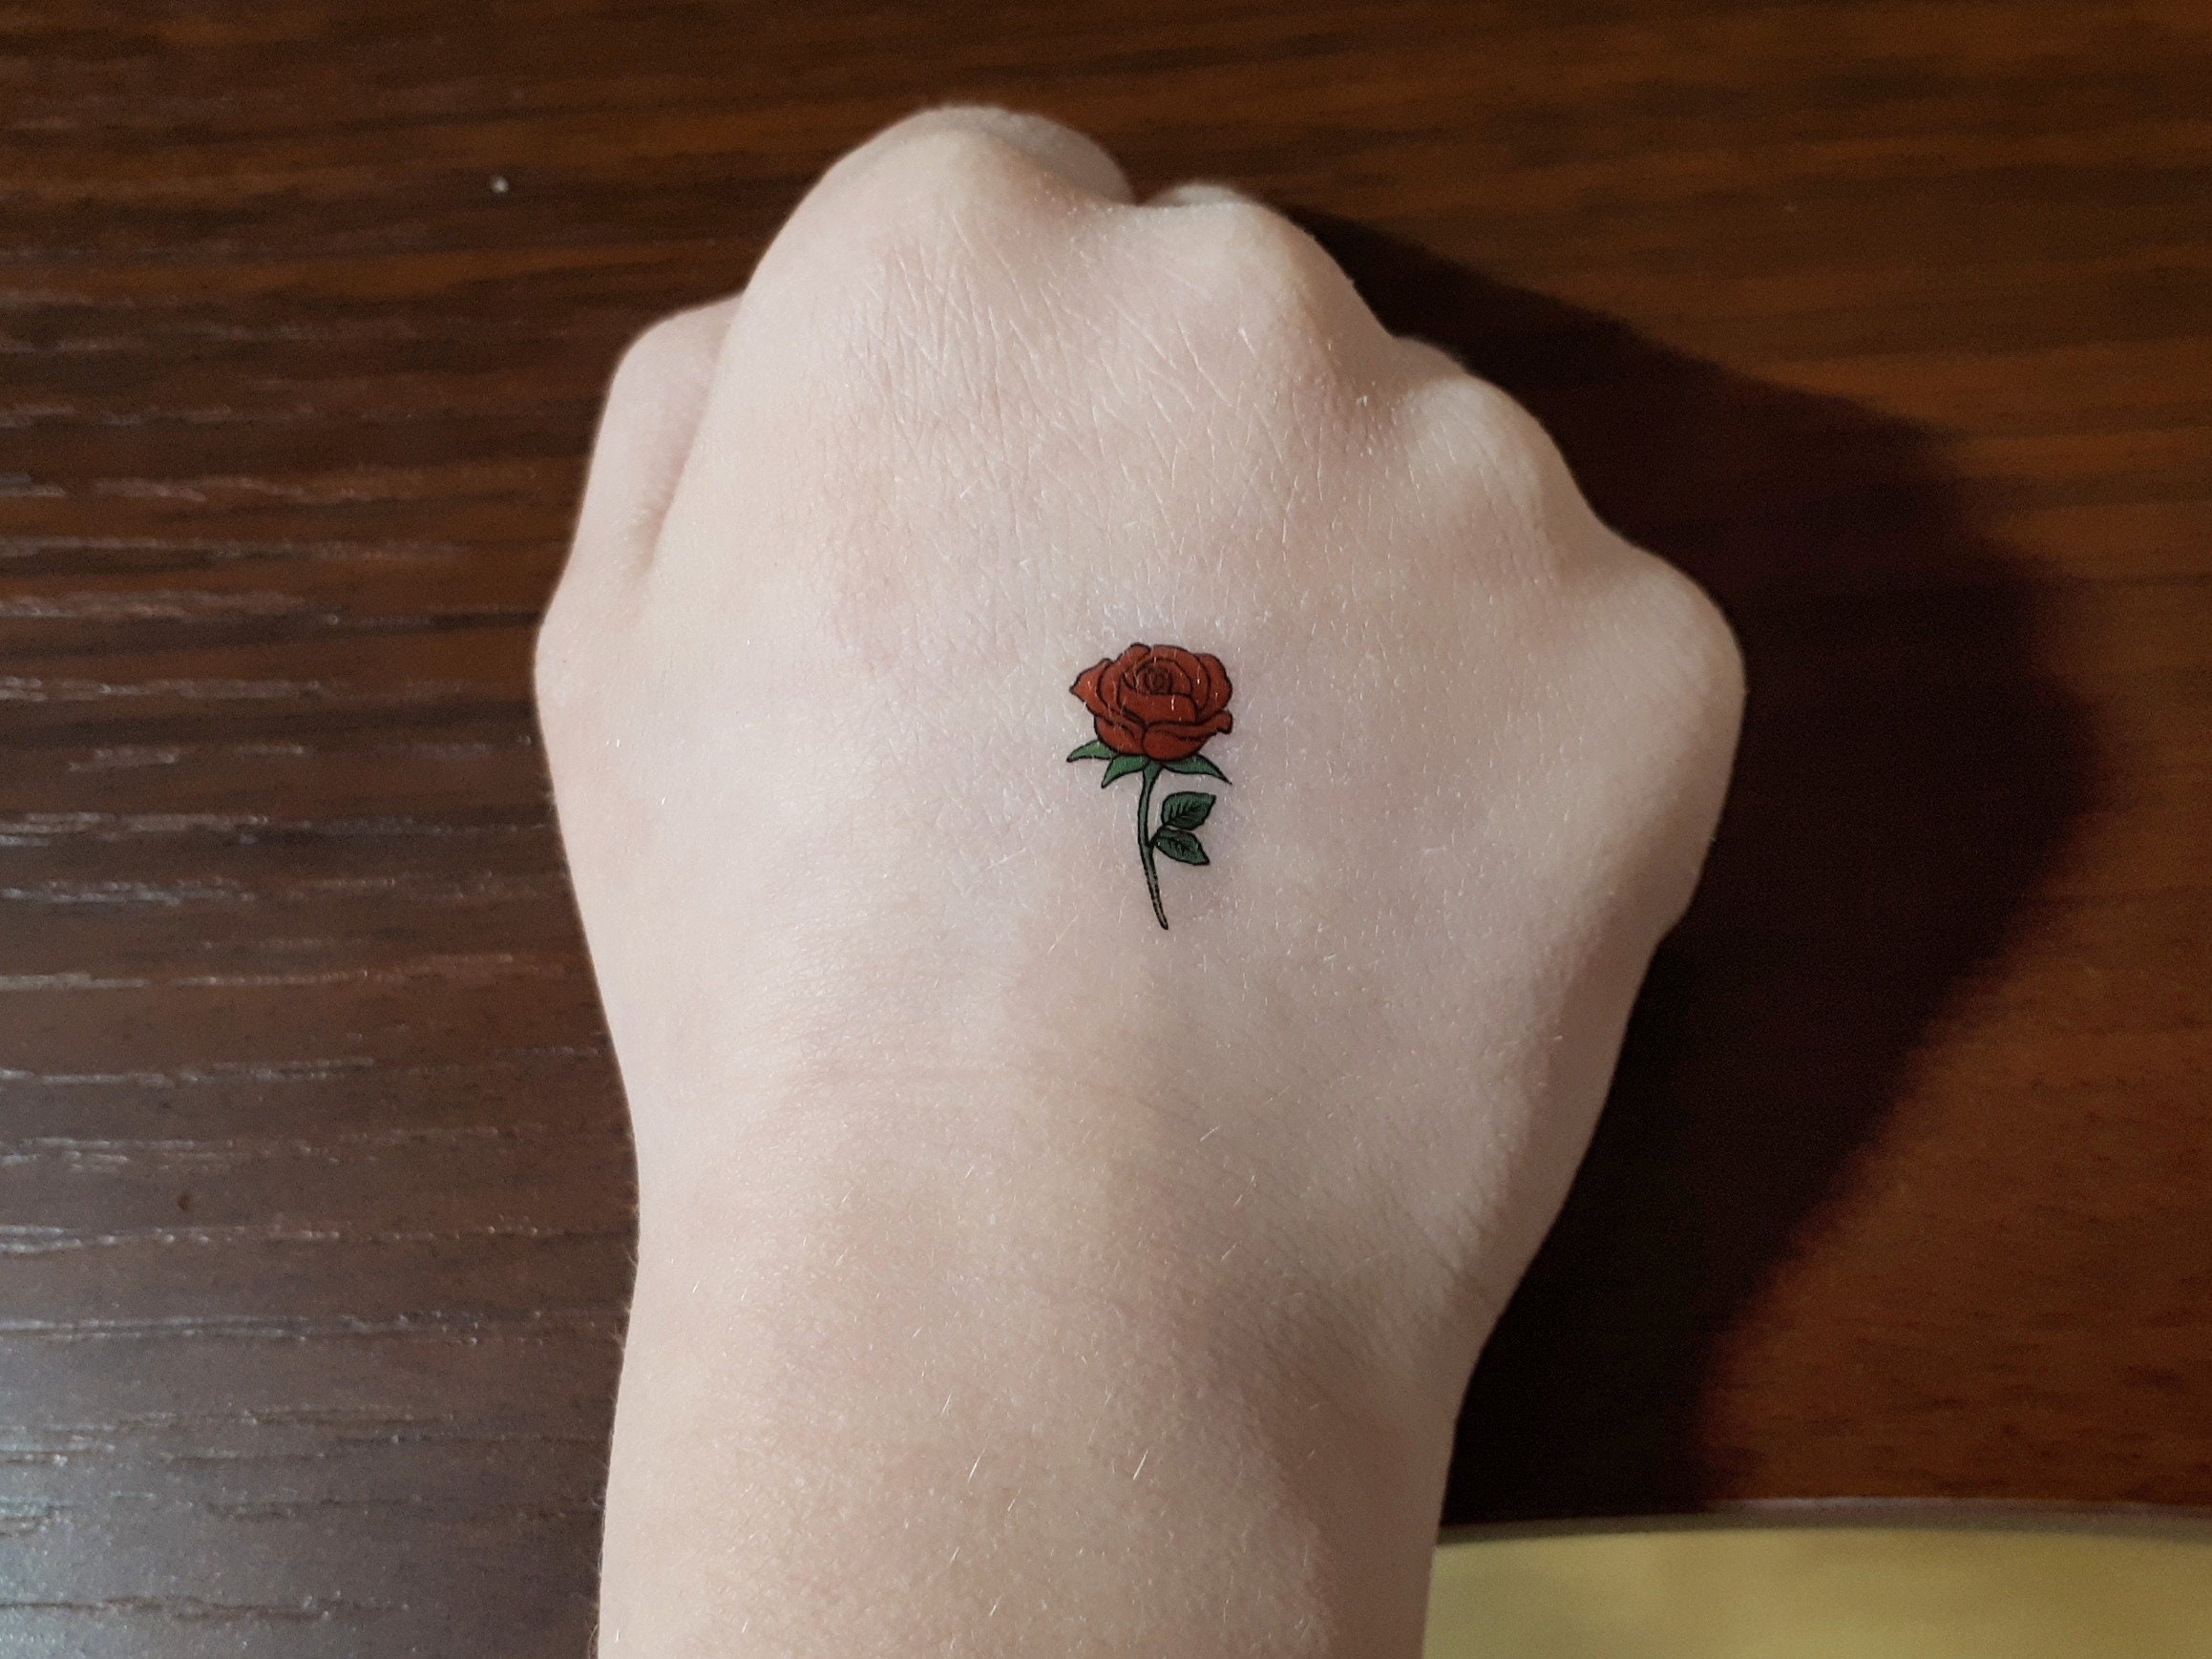 61 Small Rose Tattoos Designs for Men and Women